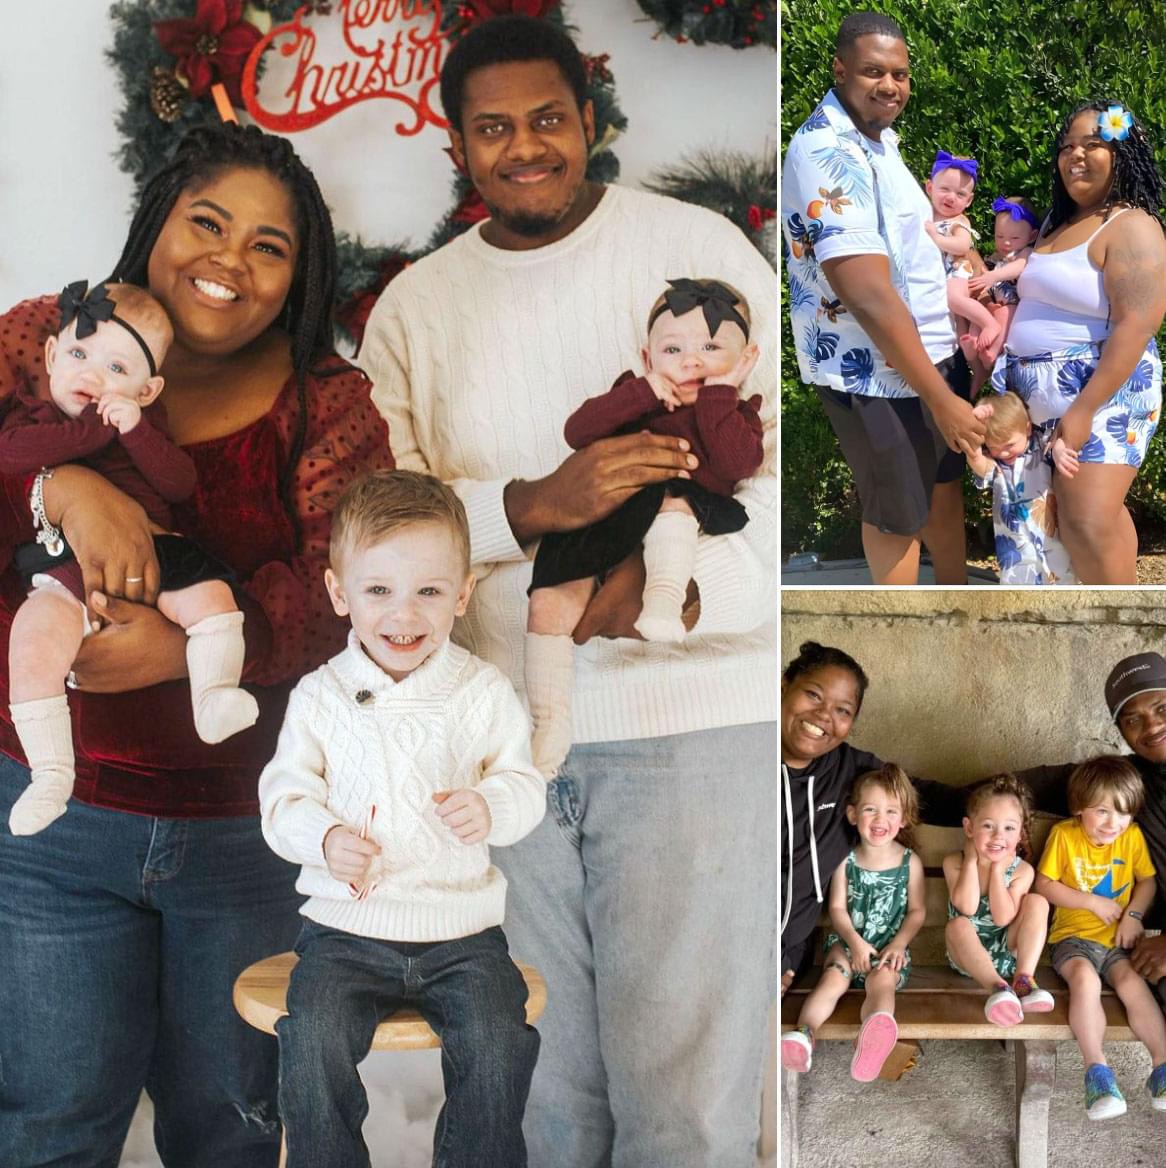 Families don’t have to match’ – Black couple share their journey to adopting three white children